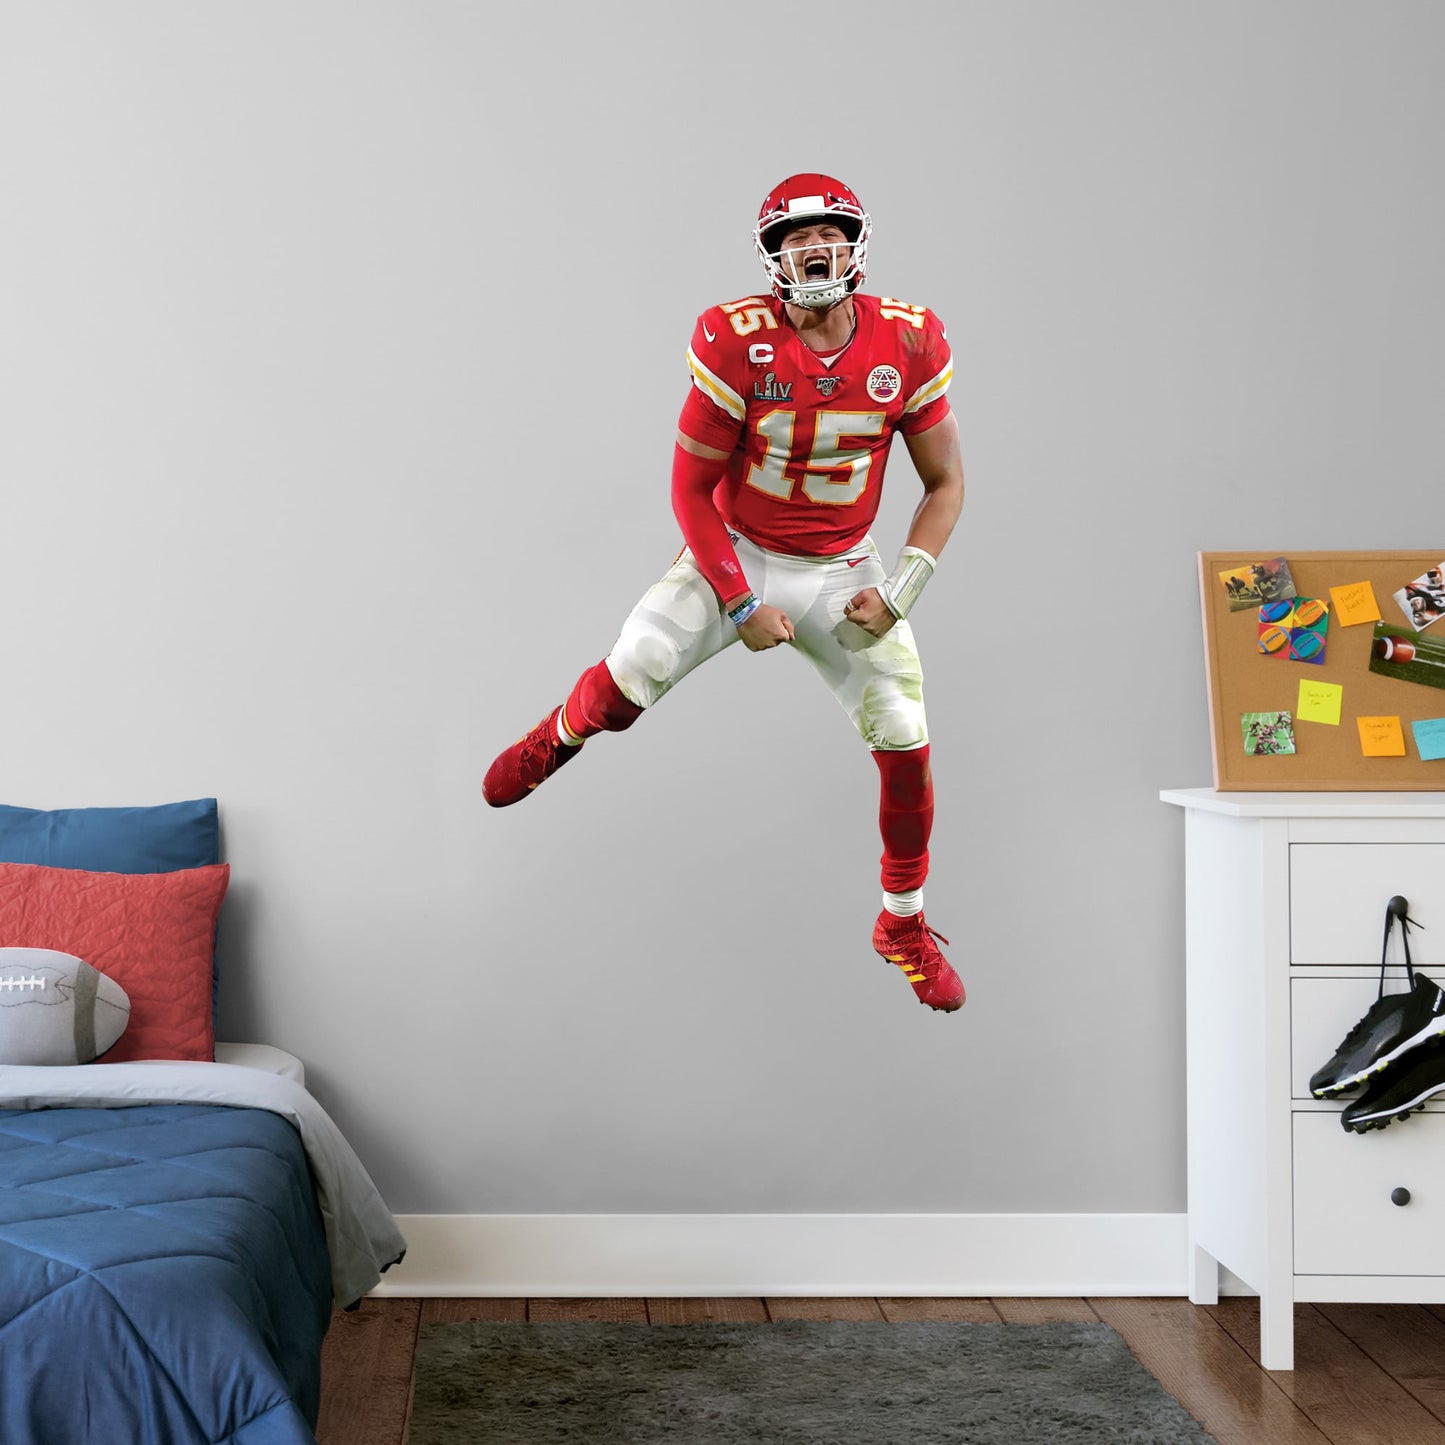 Giant Athlete + 2 Decals (29"W x 51"H) Celebrate the Chiefs' epic Super Bowl LIV win over the 49ers with this high-quality, repositionable decal of MVP quarterback Patrick Mahomes celebrating the victory. Featuring plenty of the Chiefs' red and gold, this enthusiastic Magic Mahomes decal will brighten every day of your week. It's perfect for dorms, bedrooms, and sports bars because this durable, reusable Mahomes decal only damages the competition, not your walls.